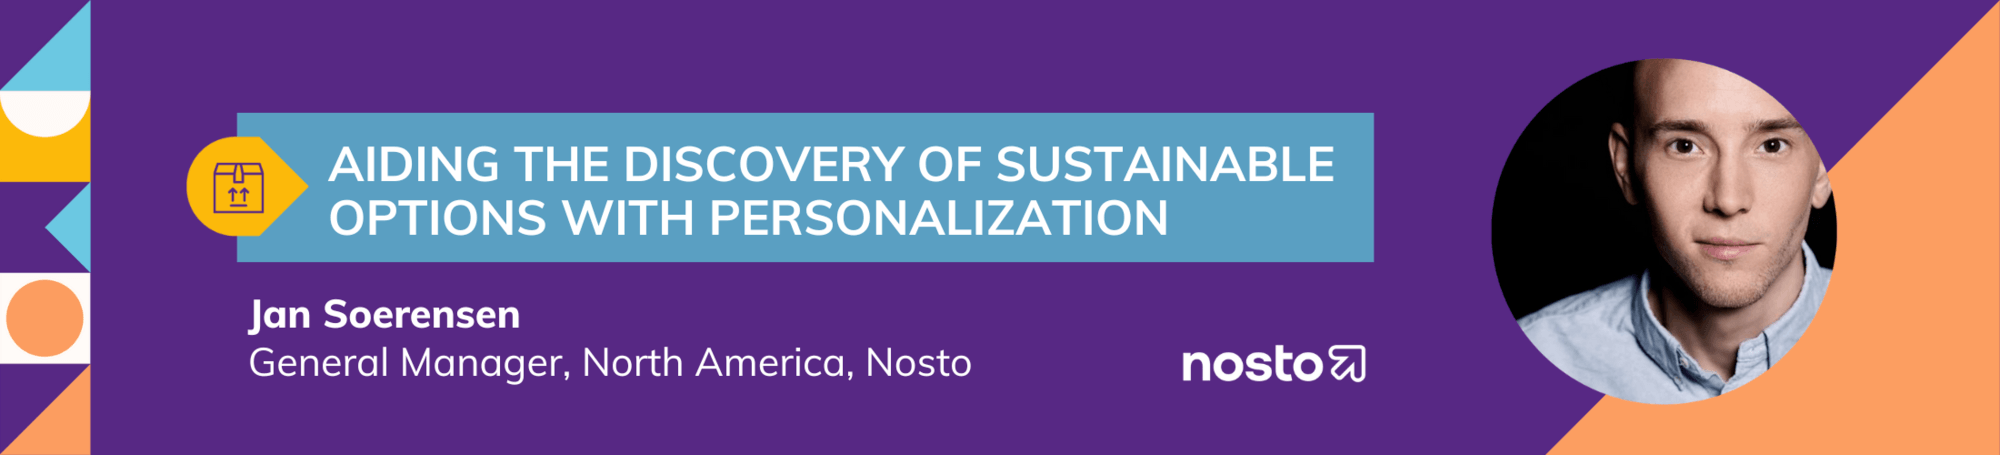 Aiding the discovery of sustainable options with personalization